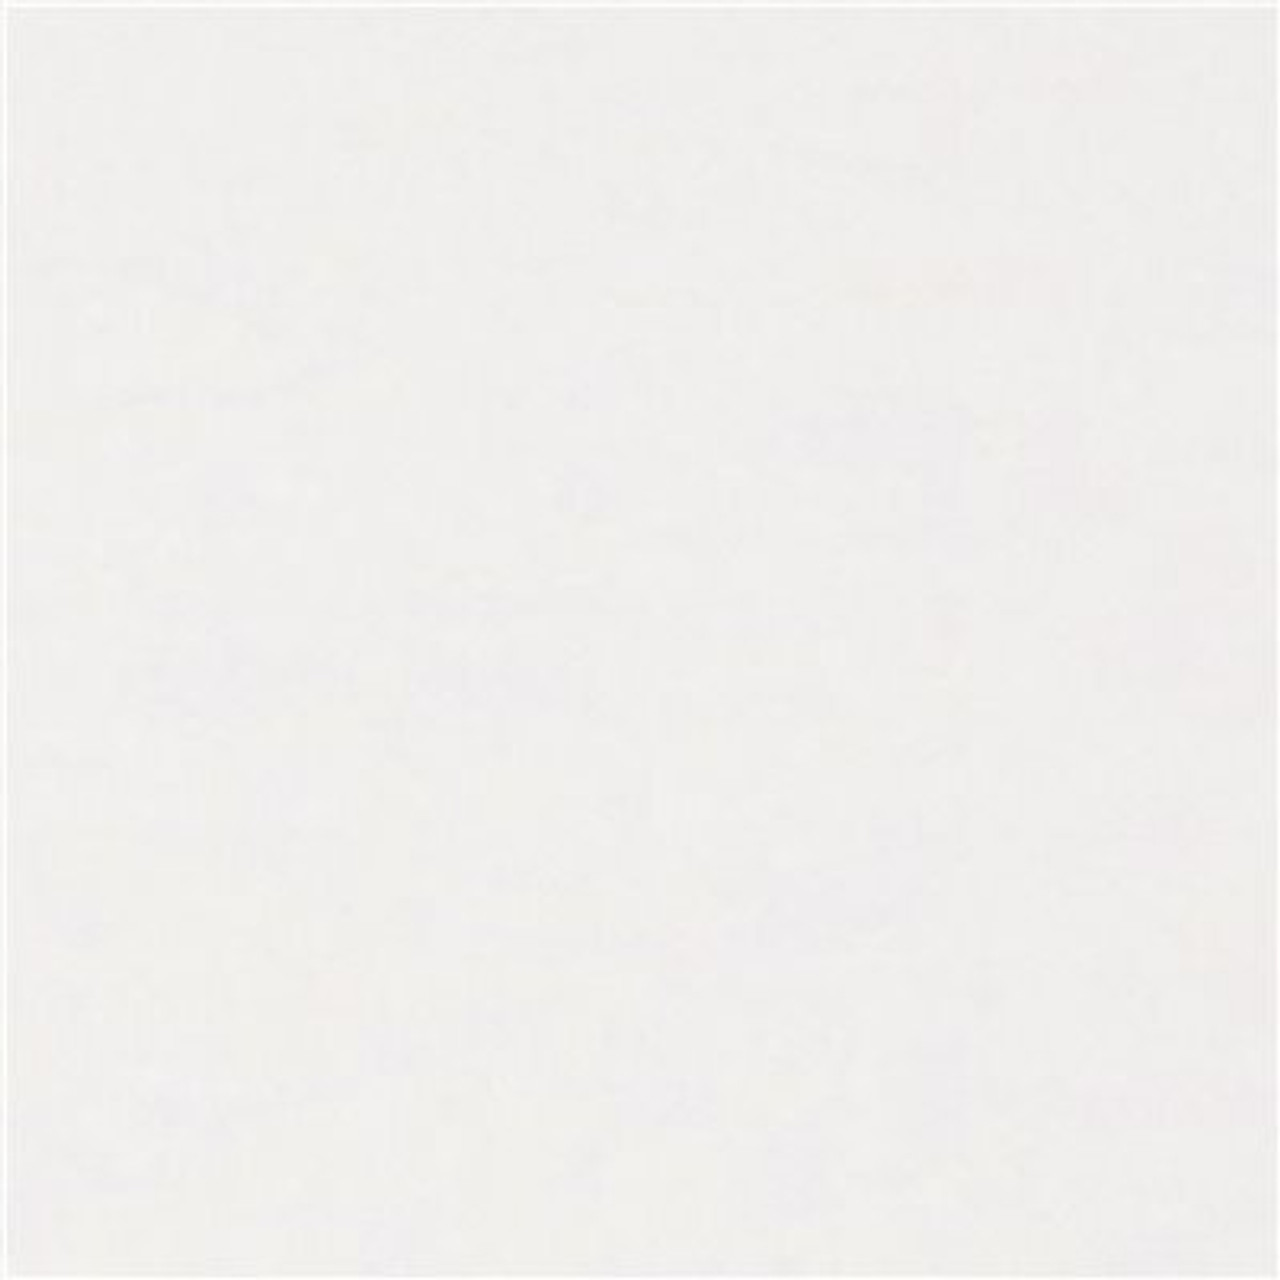 Spectratile Finale Waterproof Ceiling Tile 2 Ft. X 2 Ft. White (Pack Of 12)